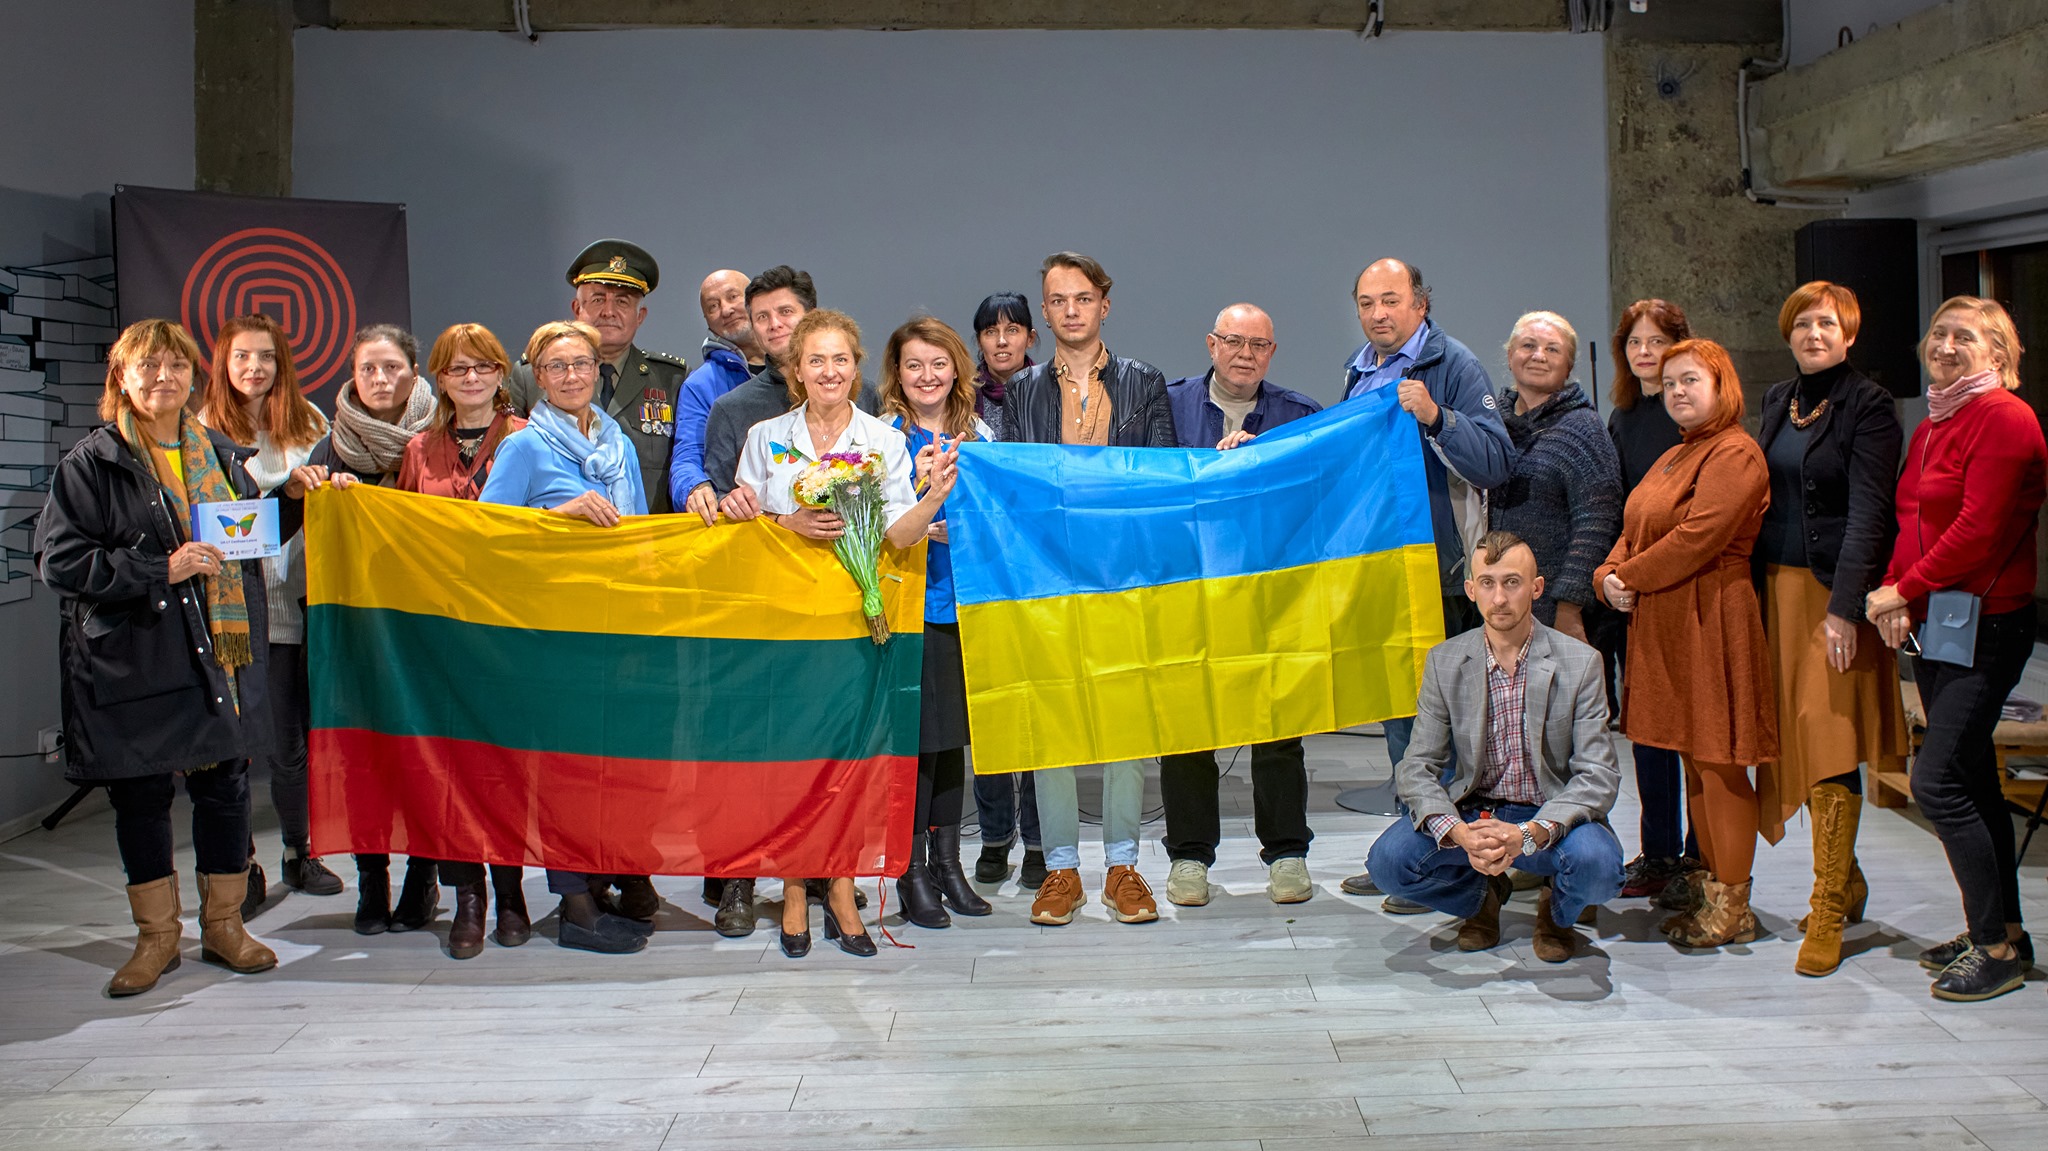 United against the Empire | Documentary digs into centuries deep roots of Ukrainian Lithuanian friendship